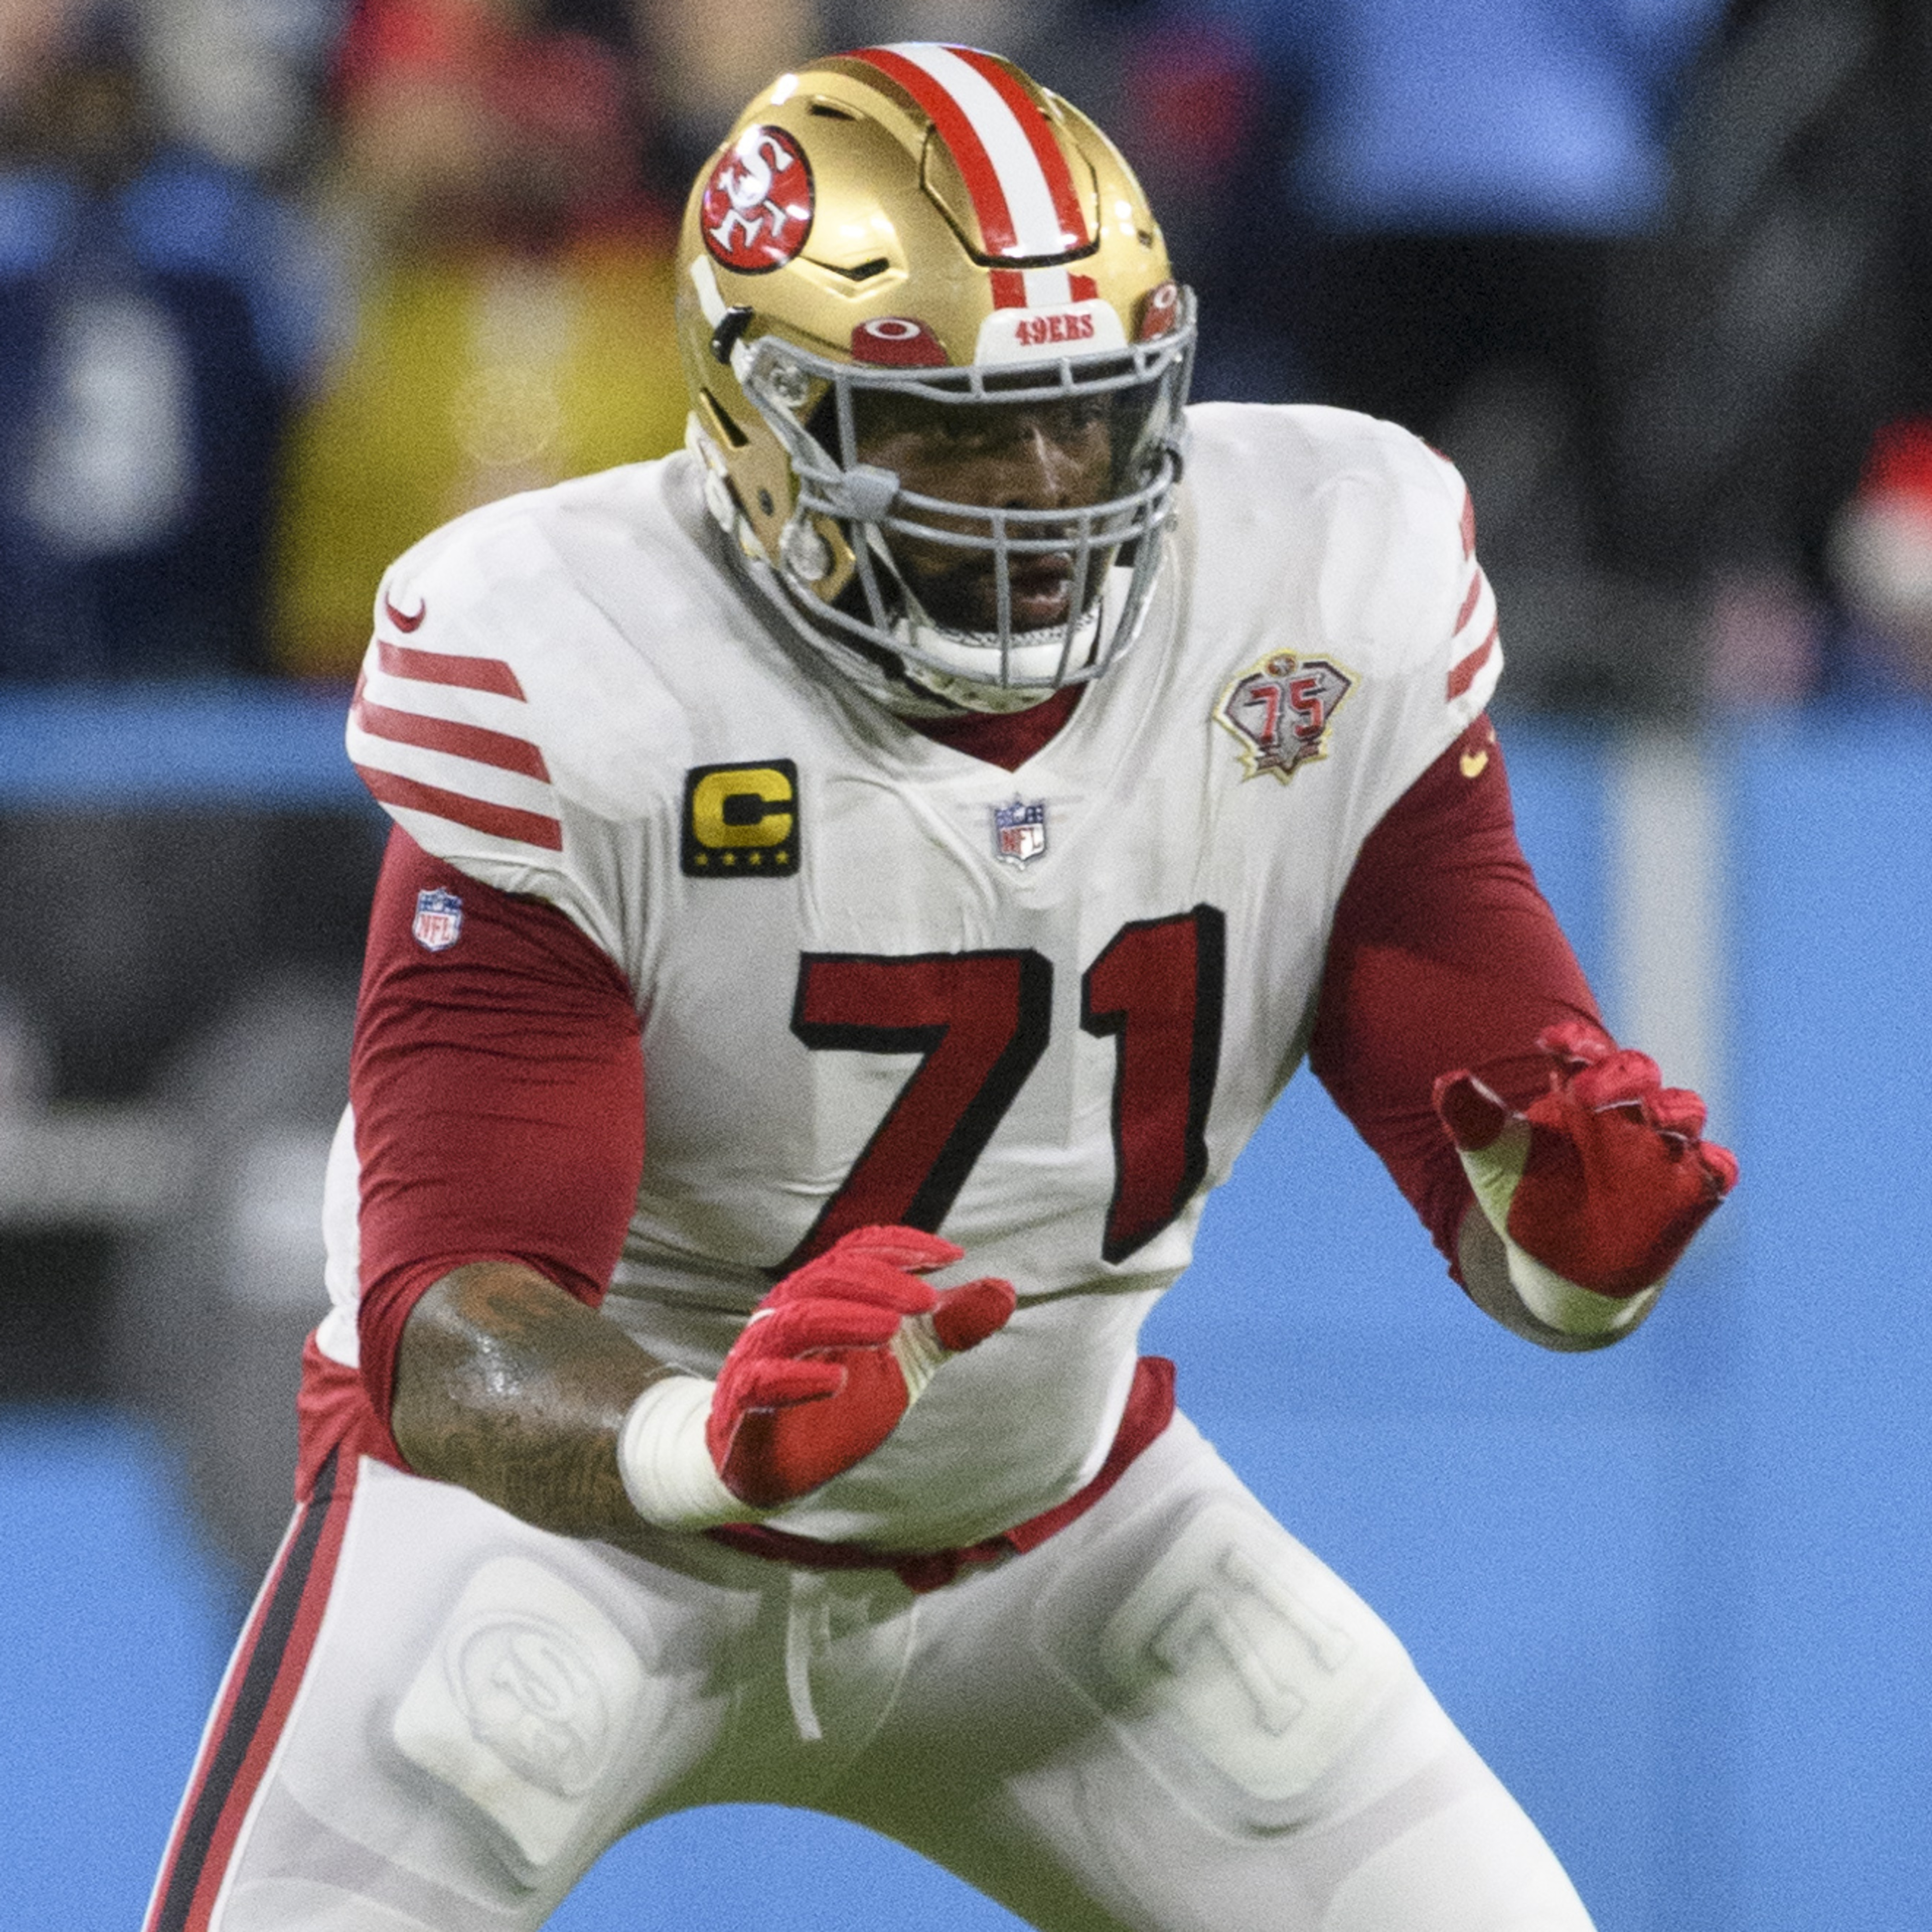 Madden NFL 23 Player Ratings: 49ers’ Trent Williams Becomes 1st OL in 99 Club